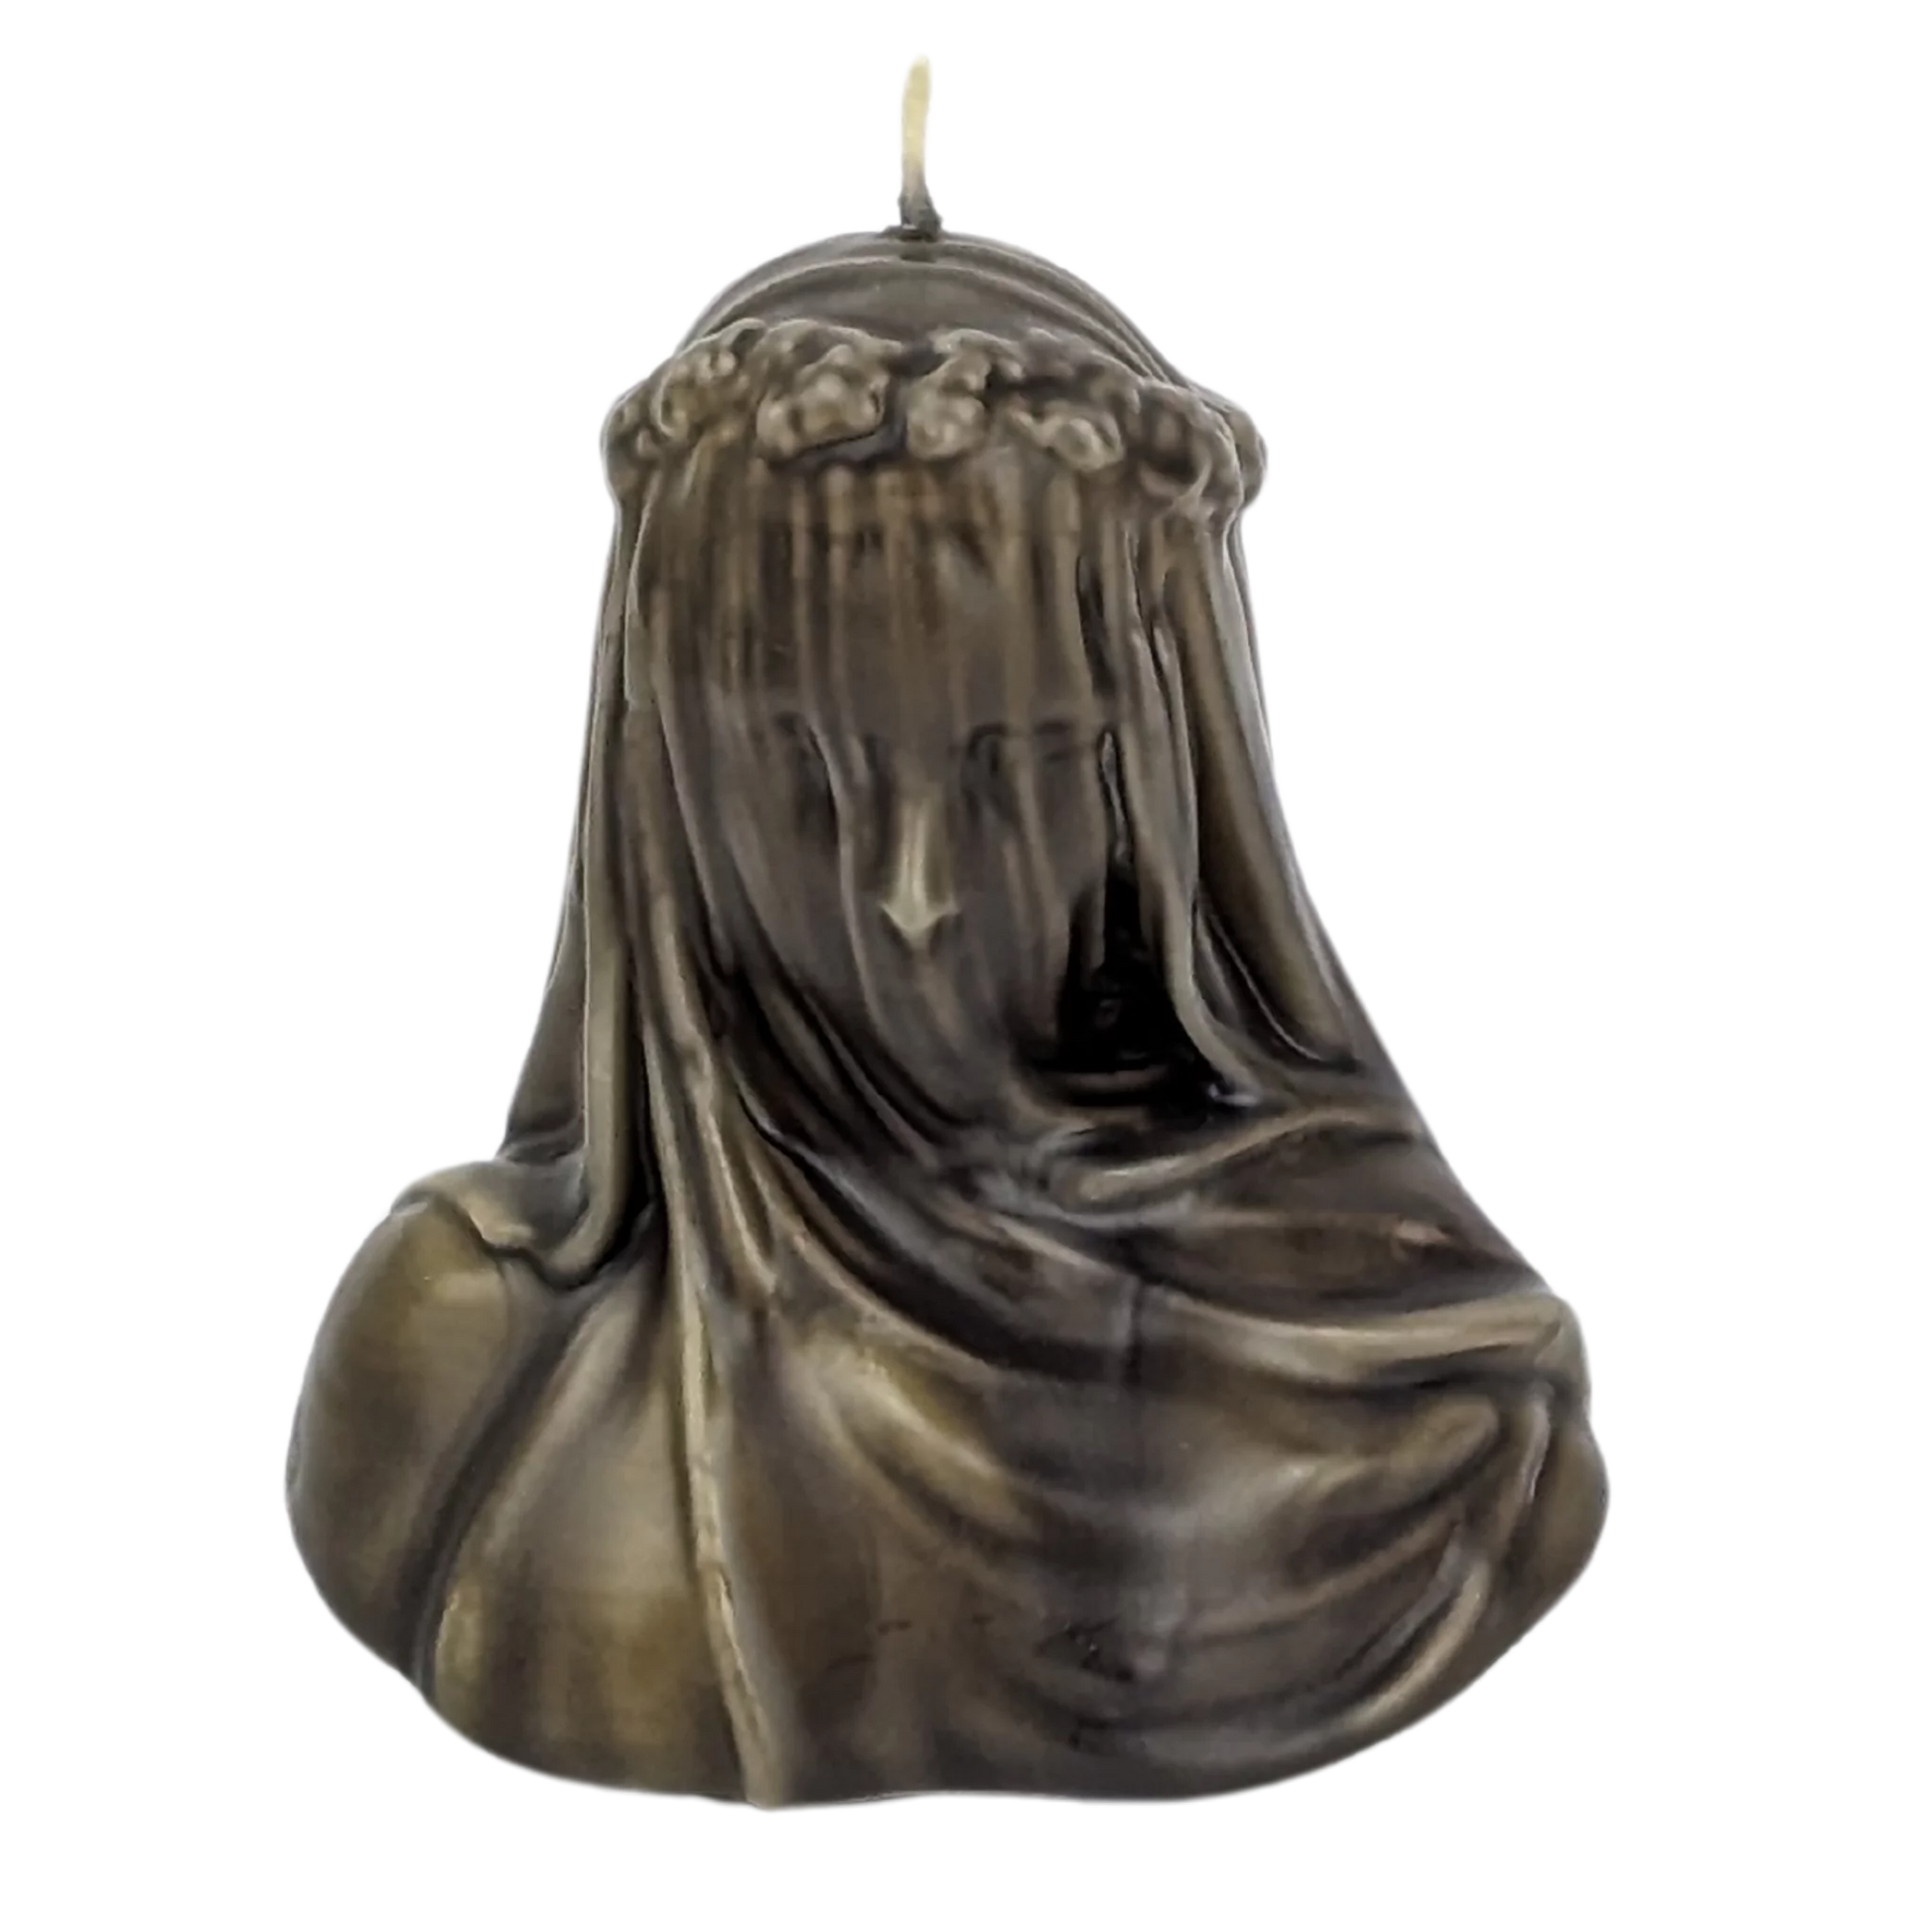 Sculptural Veiled Lady candle made from pure beeswax, a spooky yet sophisticated touch for Halloween and all-year elegance.